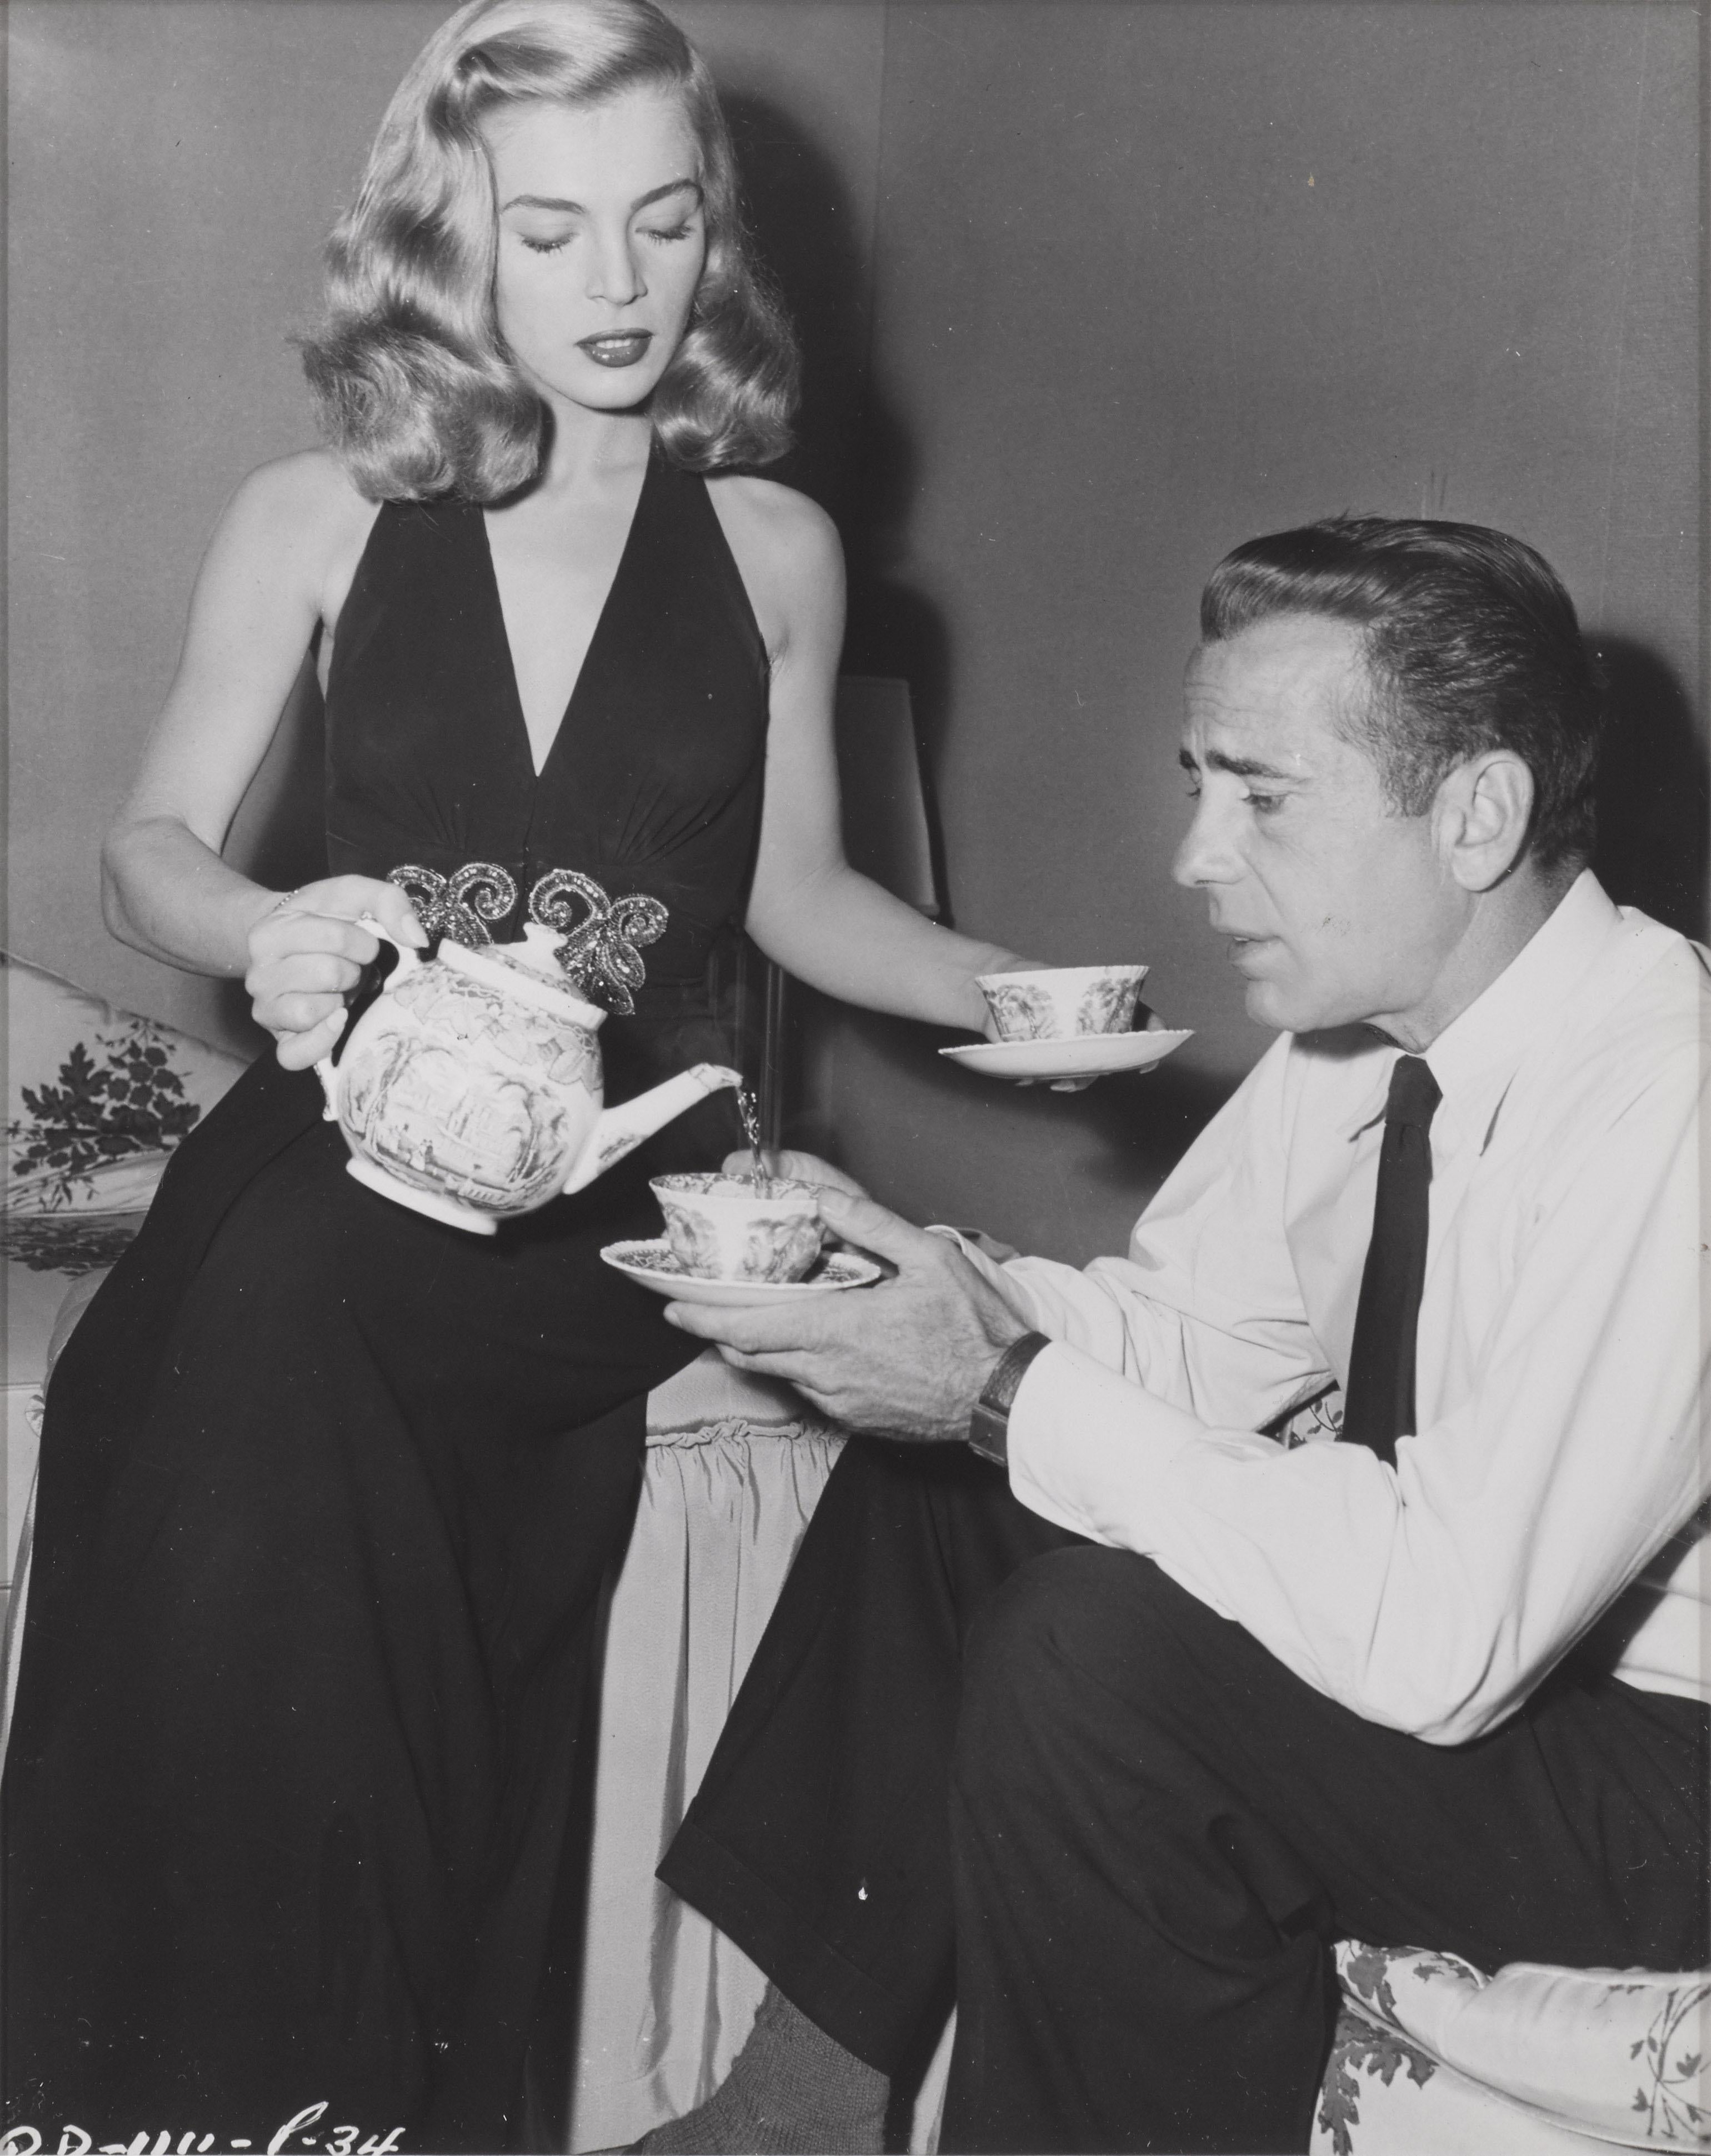 Original candid photographic production still for the 1947 Film Noir starring Humphrey Bogart and Lizabeth Scott.
This film was directed by John Cromwell. This candid photographic production shows Lizabeth Scott pouring Humphrey Bogart tea between